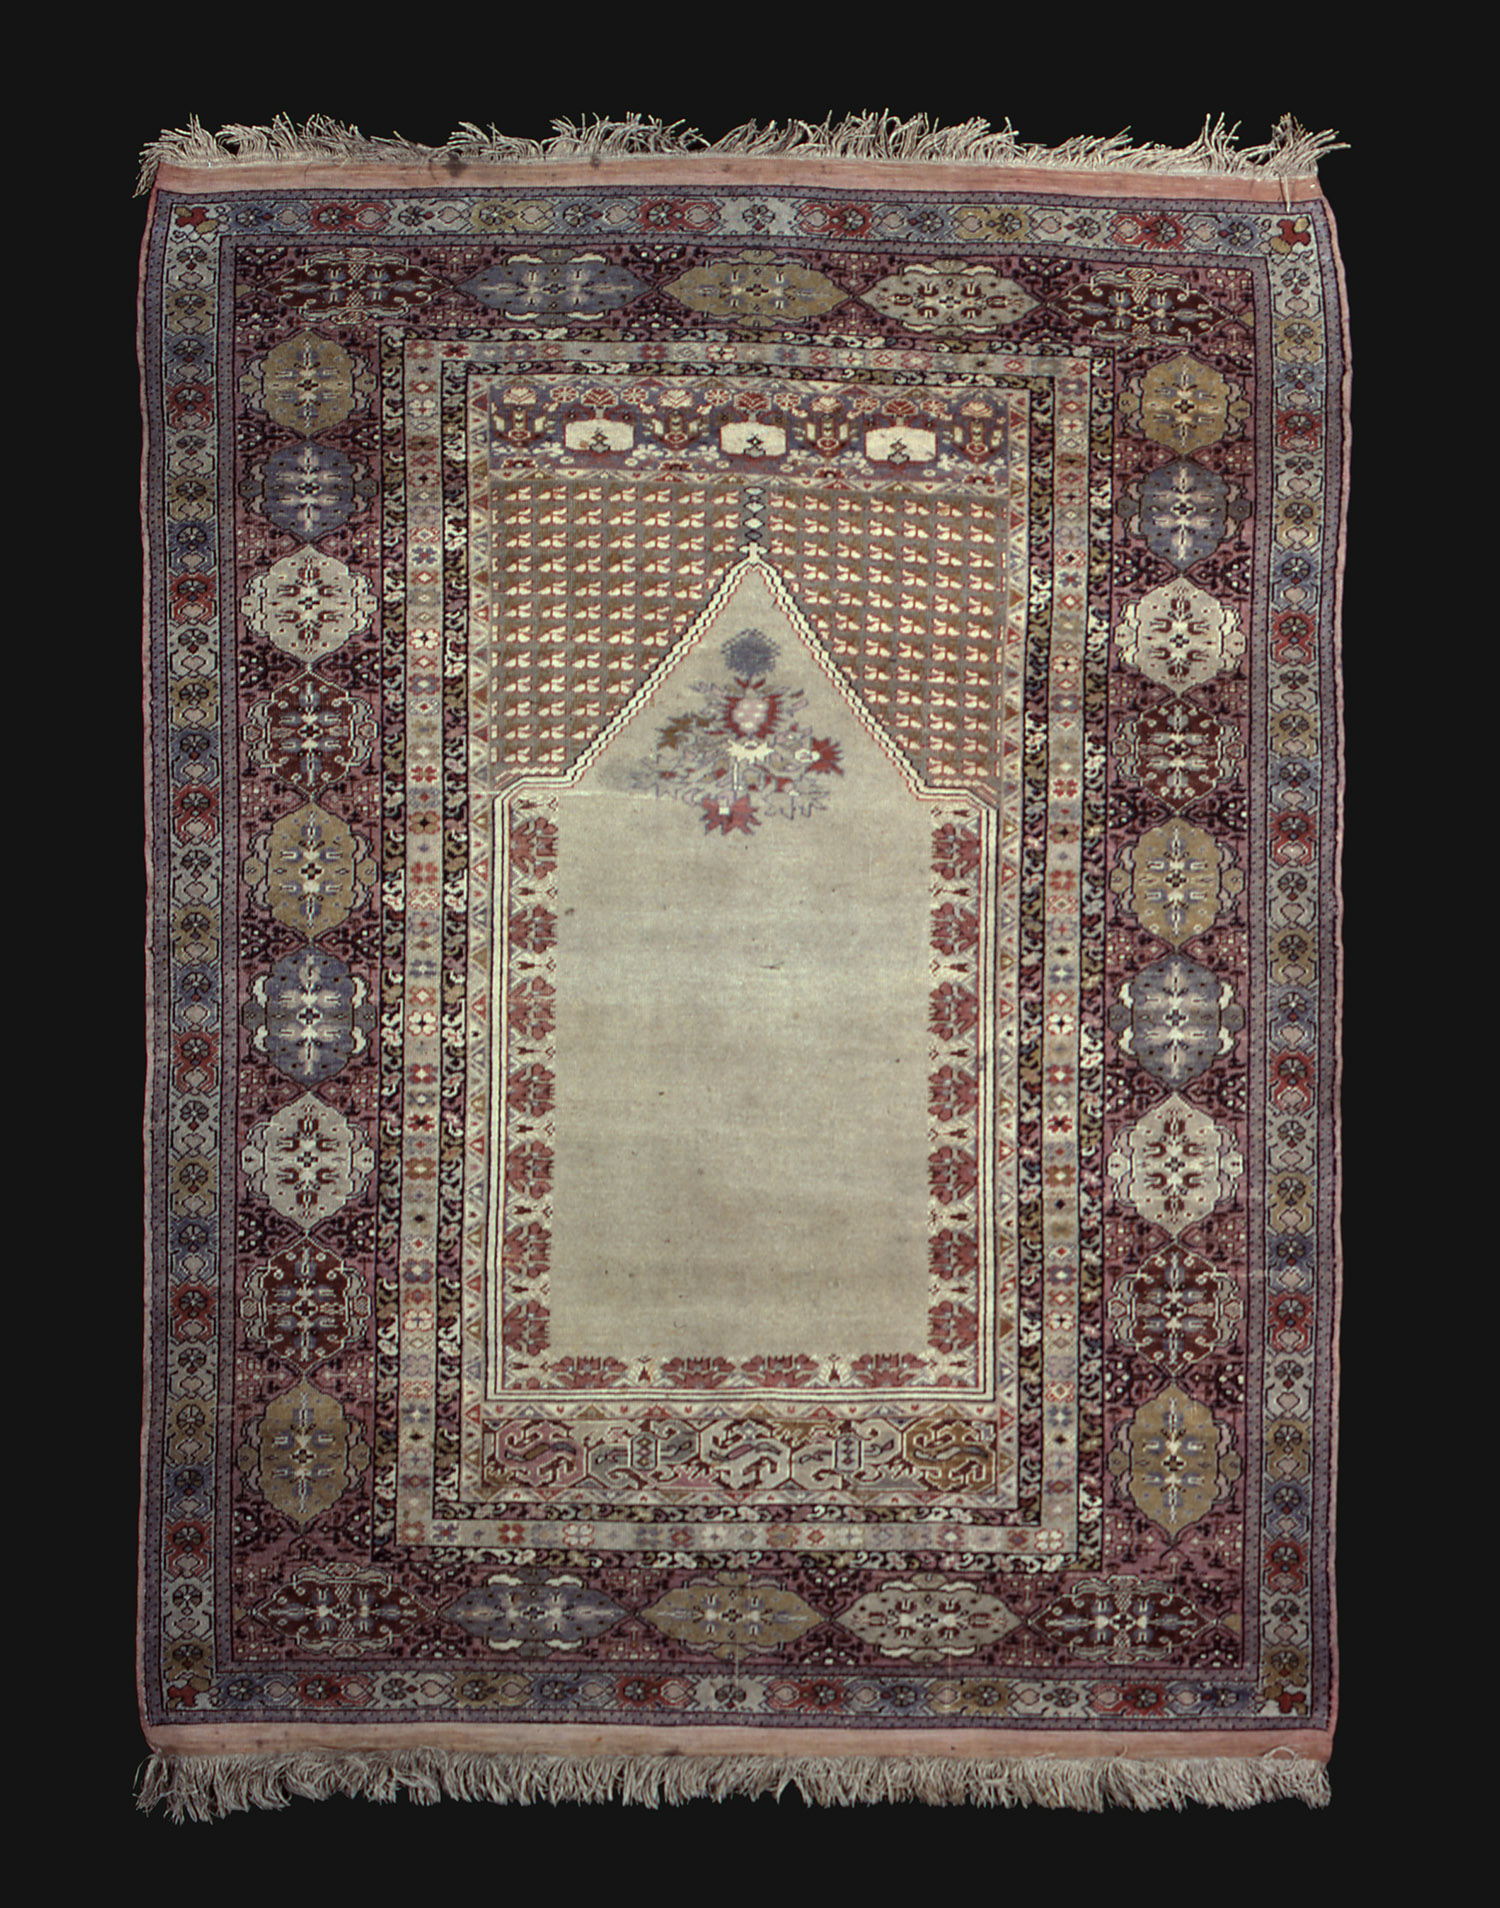 Reproduction of a Gördes prayer rug. Photograph courtesy of the Textile Museum and the George Washington University Museum.